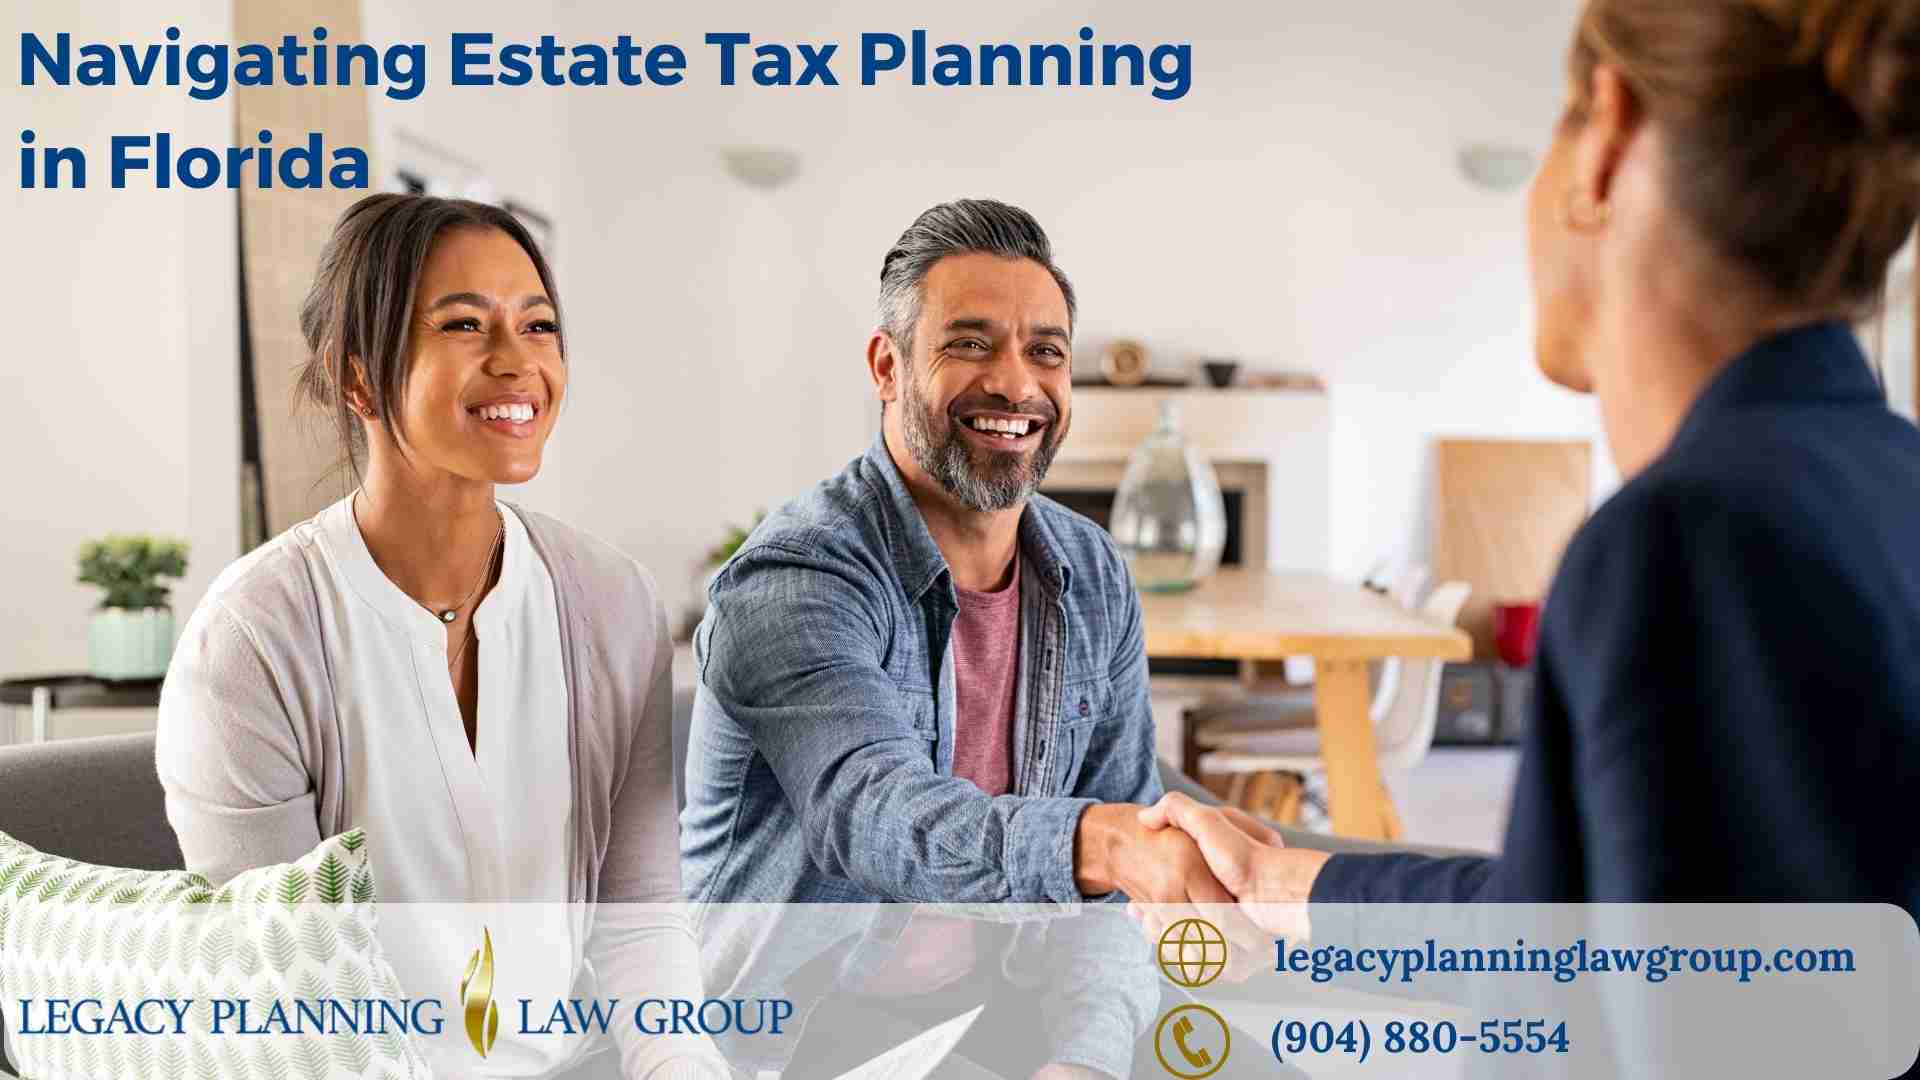 A couple learning about Estate Tax Planning in Florida